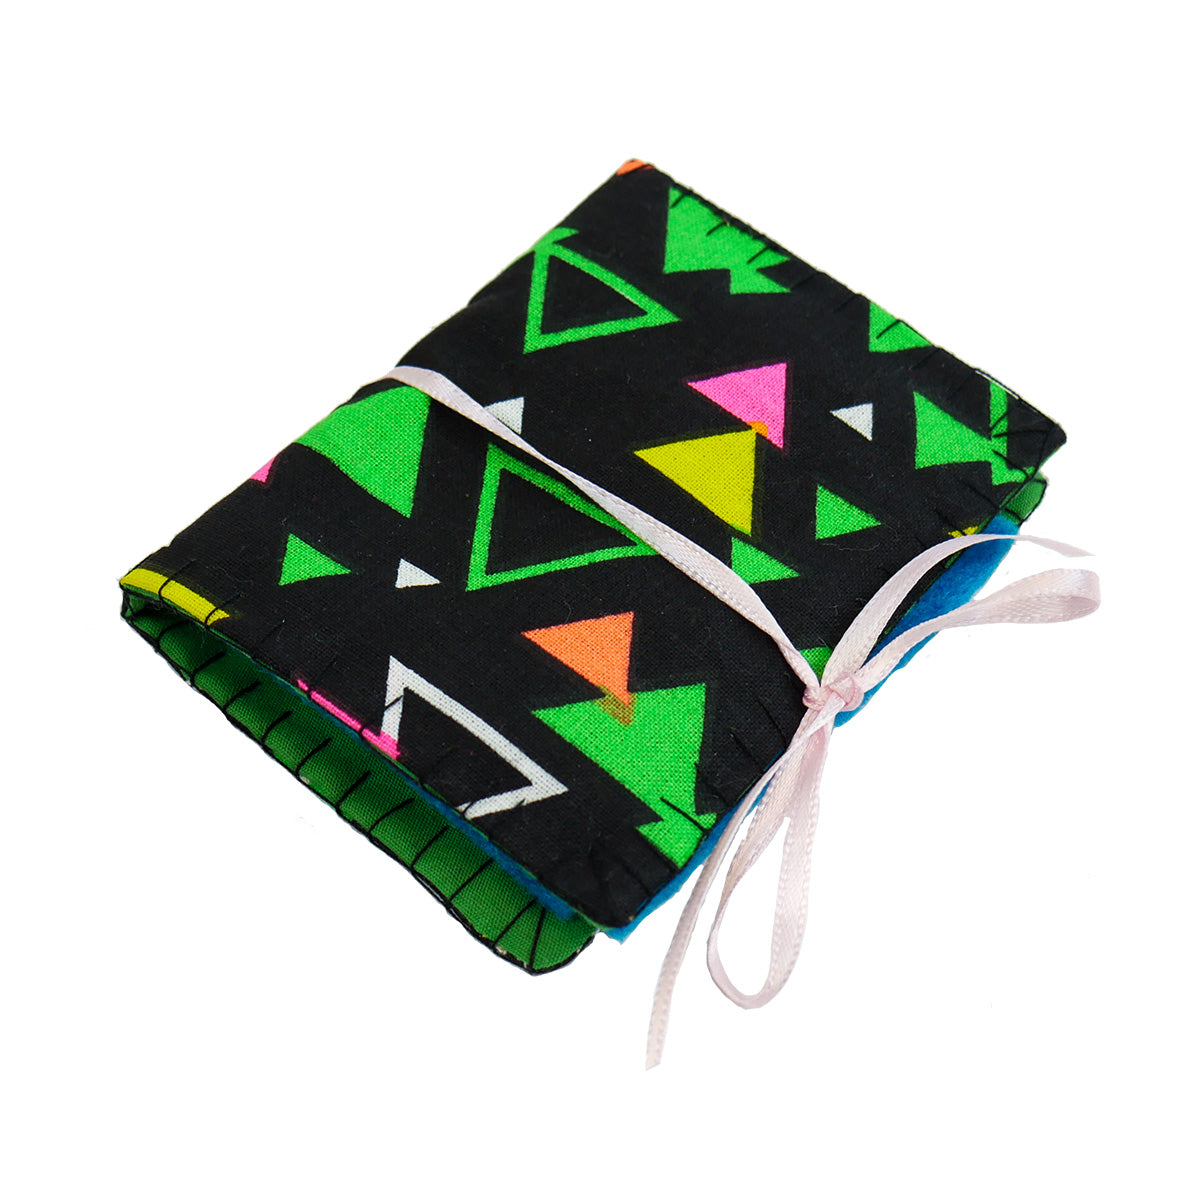 A single completed Needle Book with black and green retro patterned fabric on the outside, bright blue felt pages on the inside, and a thin white ribbon tying it closed around with a bow.